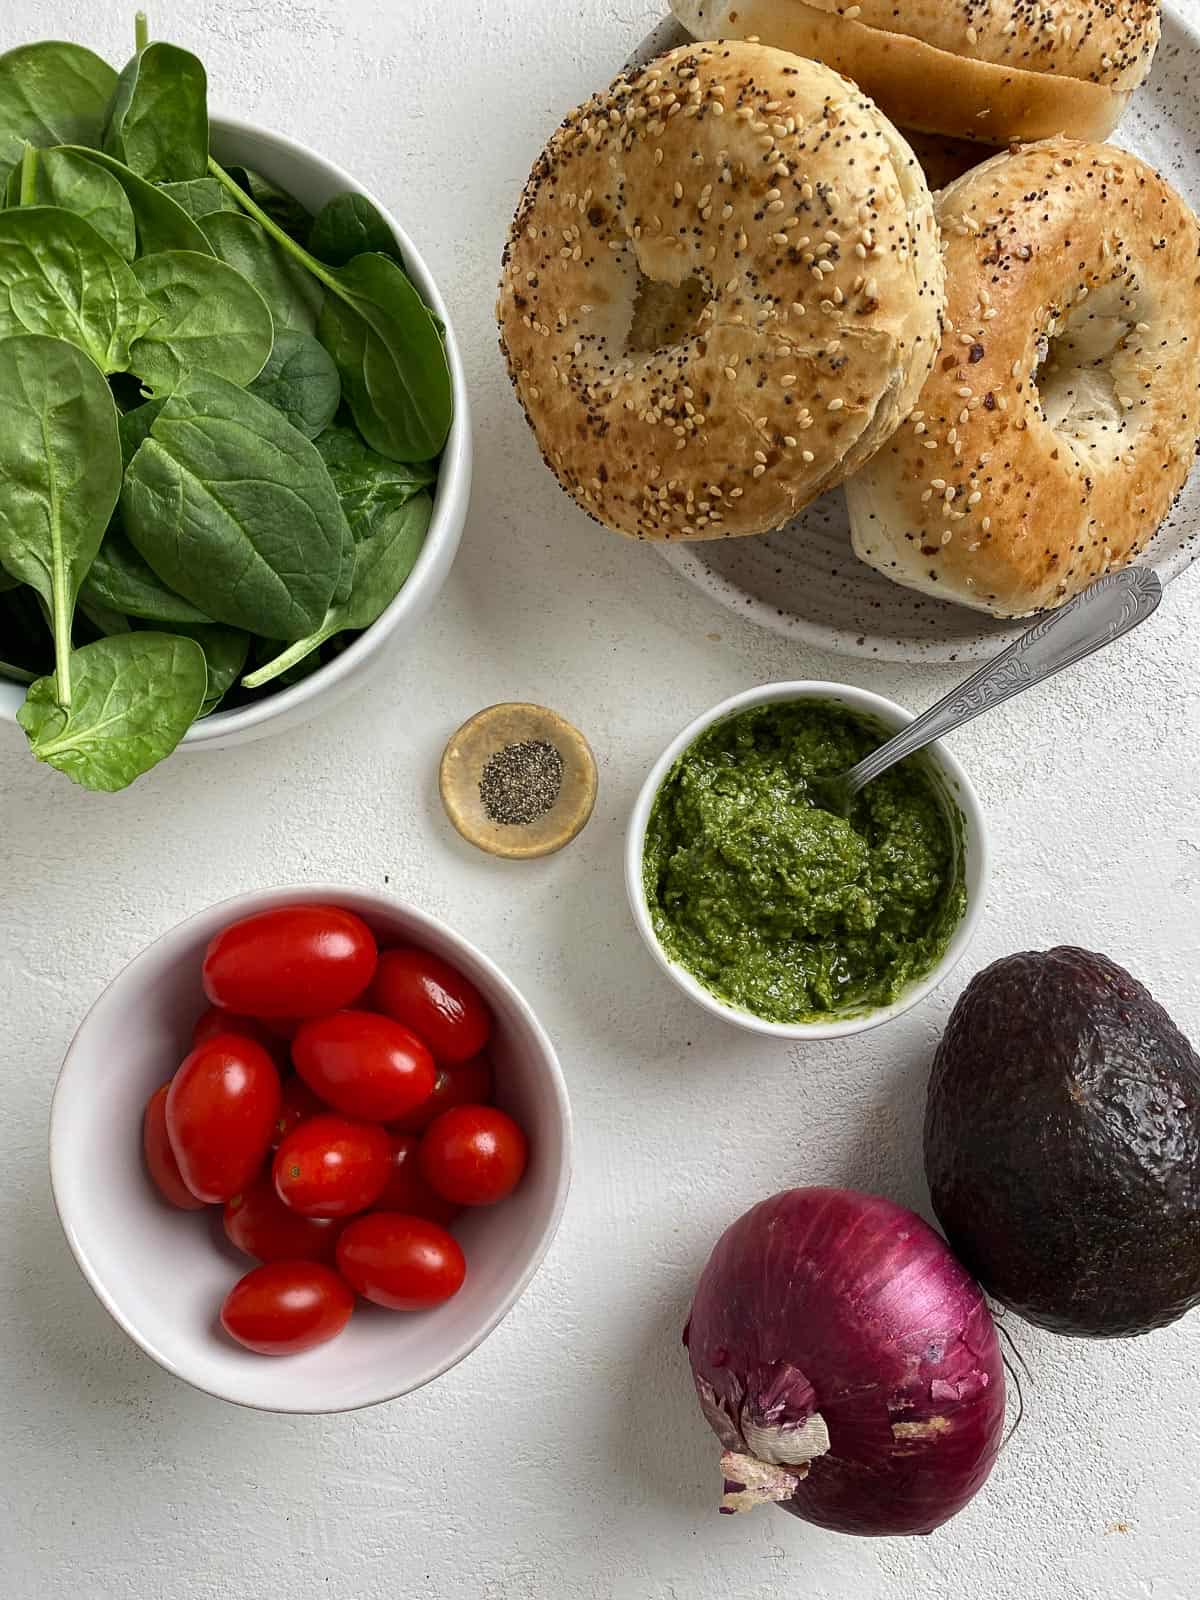 ingredients for Vegan Bagel Sandwich with Pesto measured out against a white surface